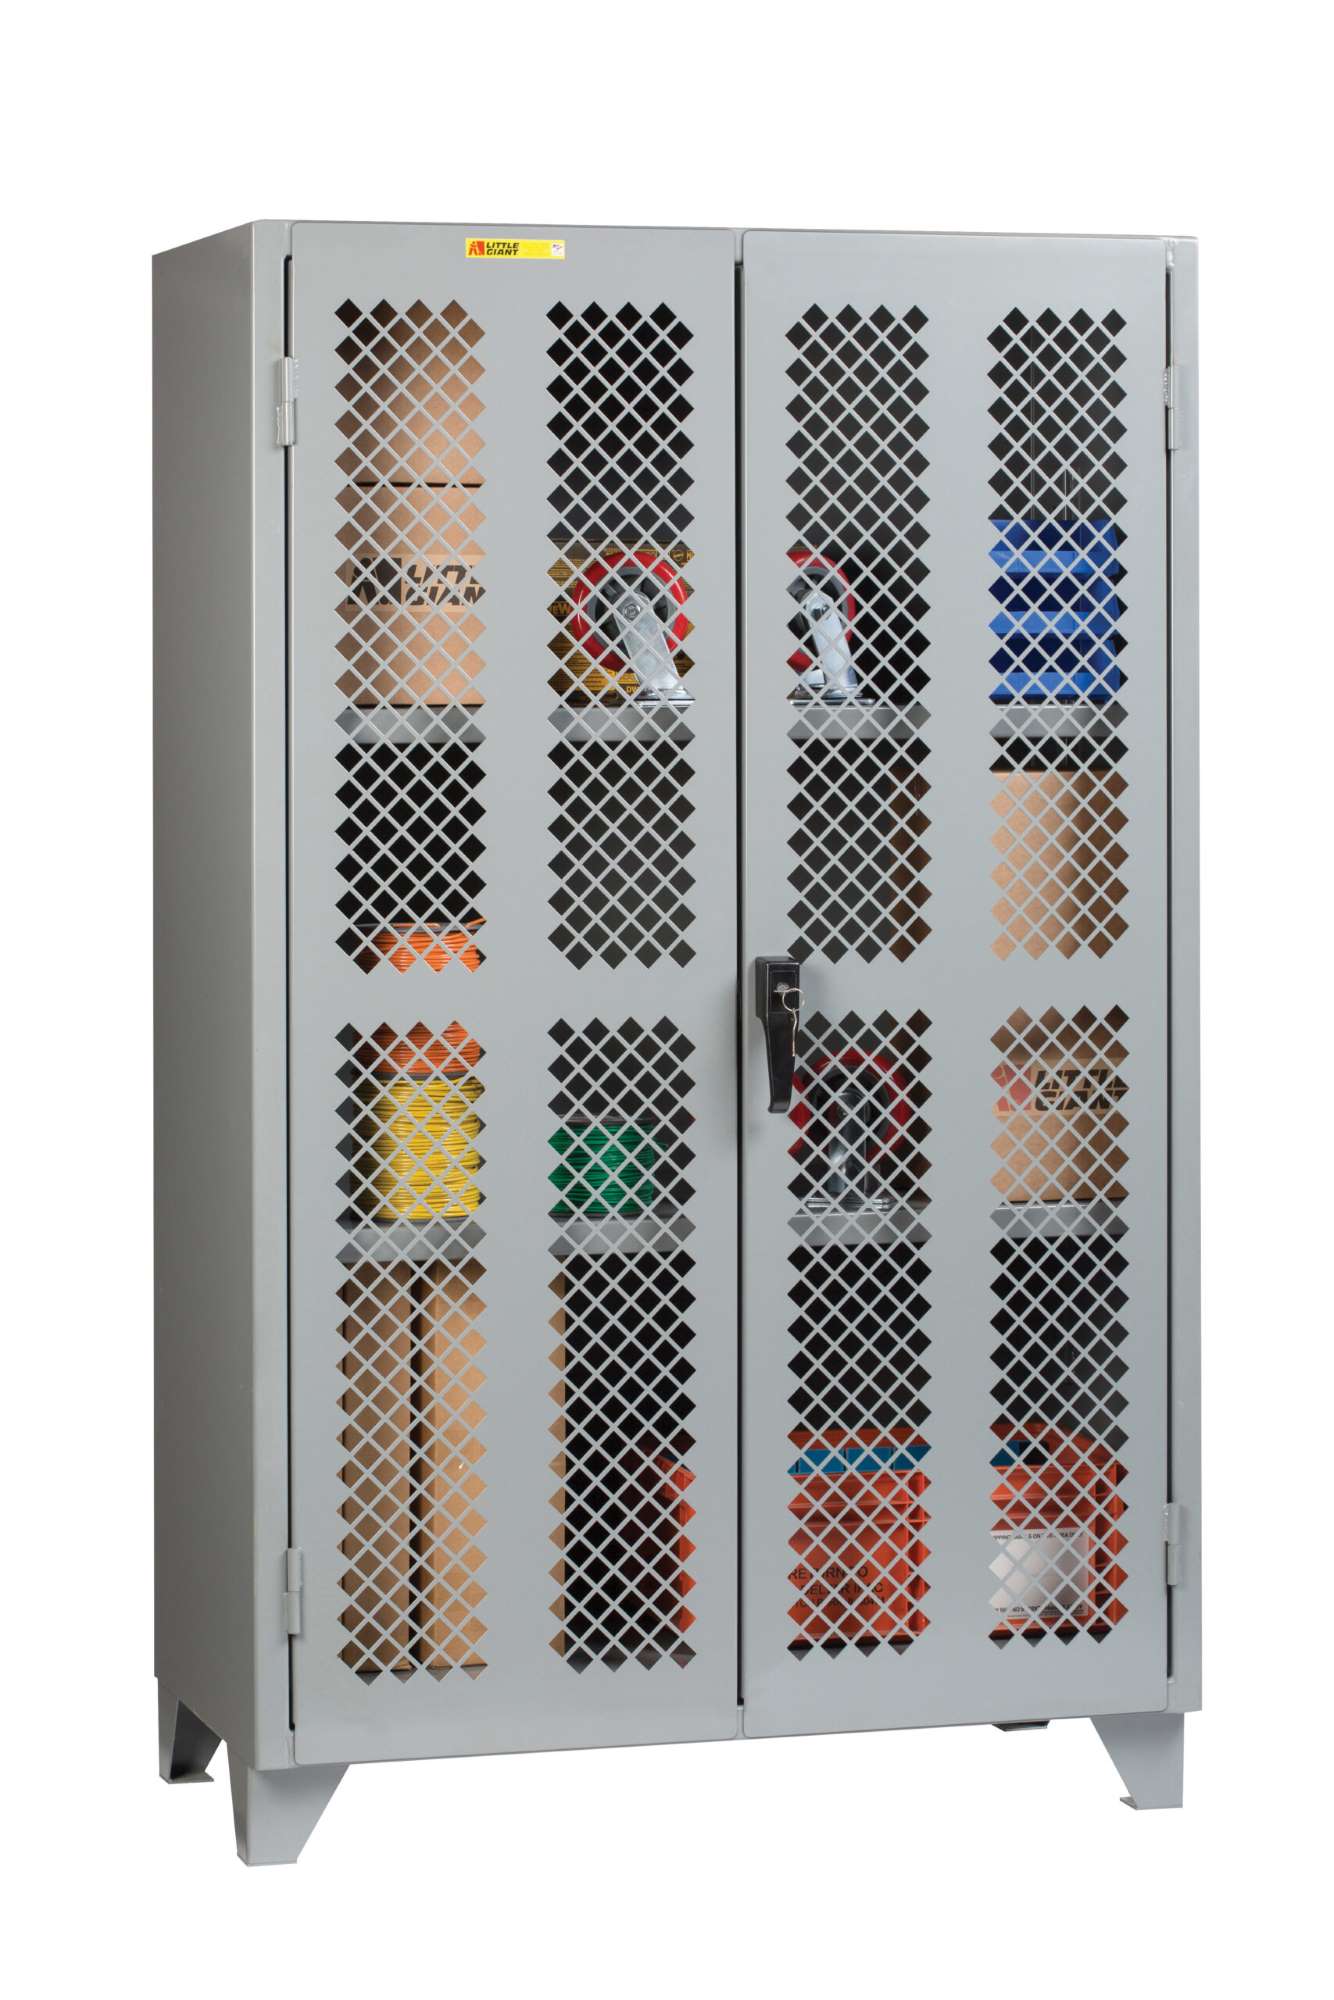 Little Giant High Capacity Storage Cabinet with PErforated Doors, locking perforated door cabinet, Welded Storage Cabinet, 2 Shelf storage cabinet, All welded storage cabinet, High visibility cabinet